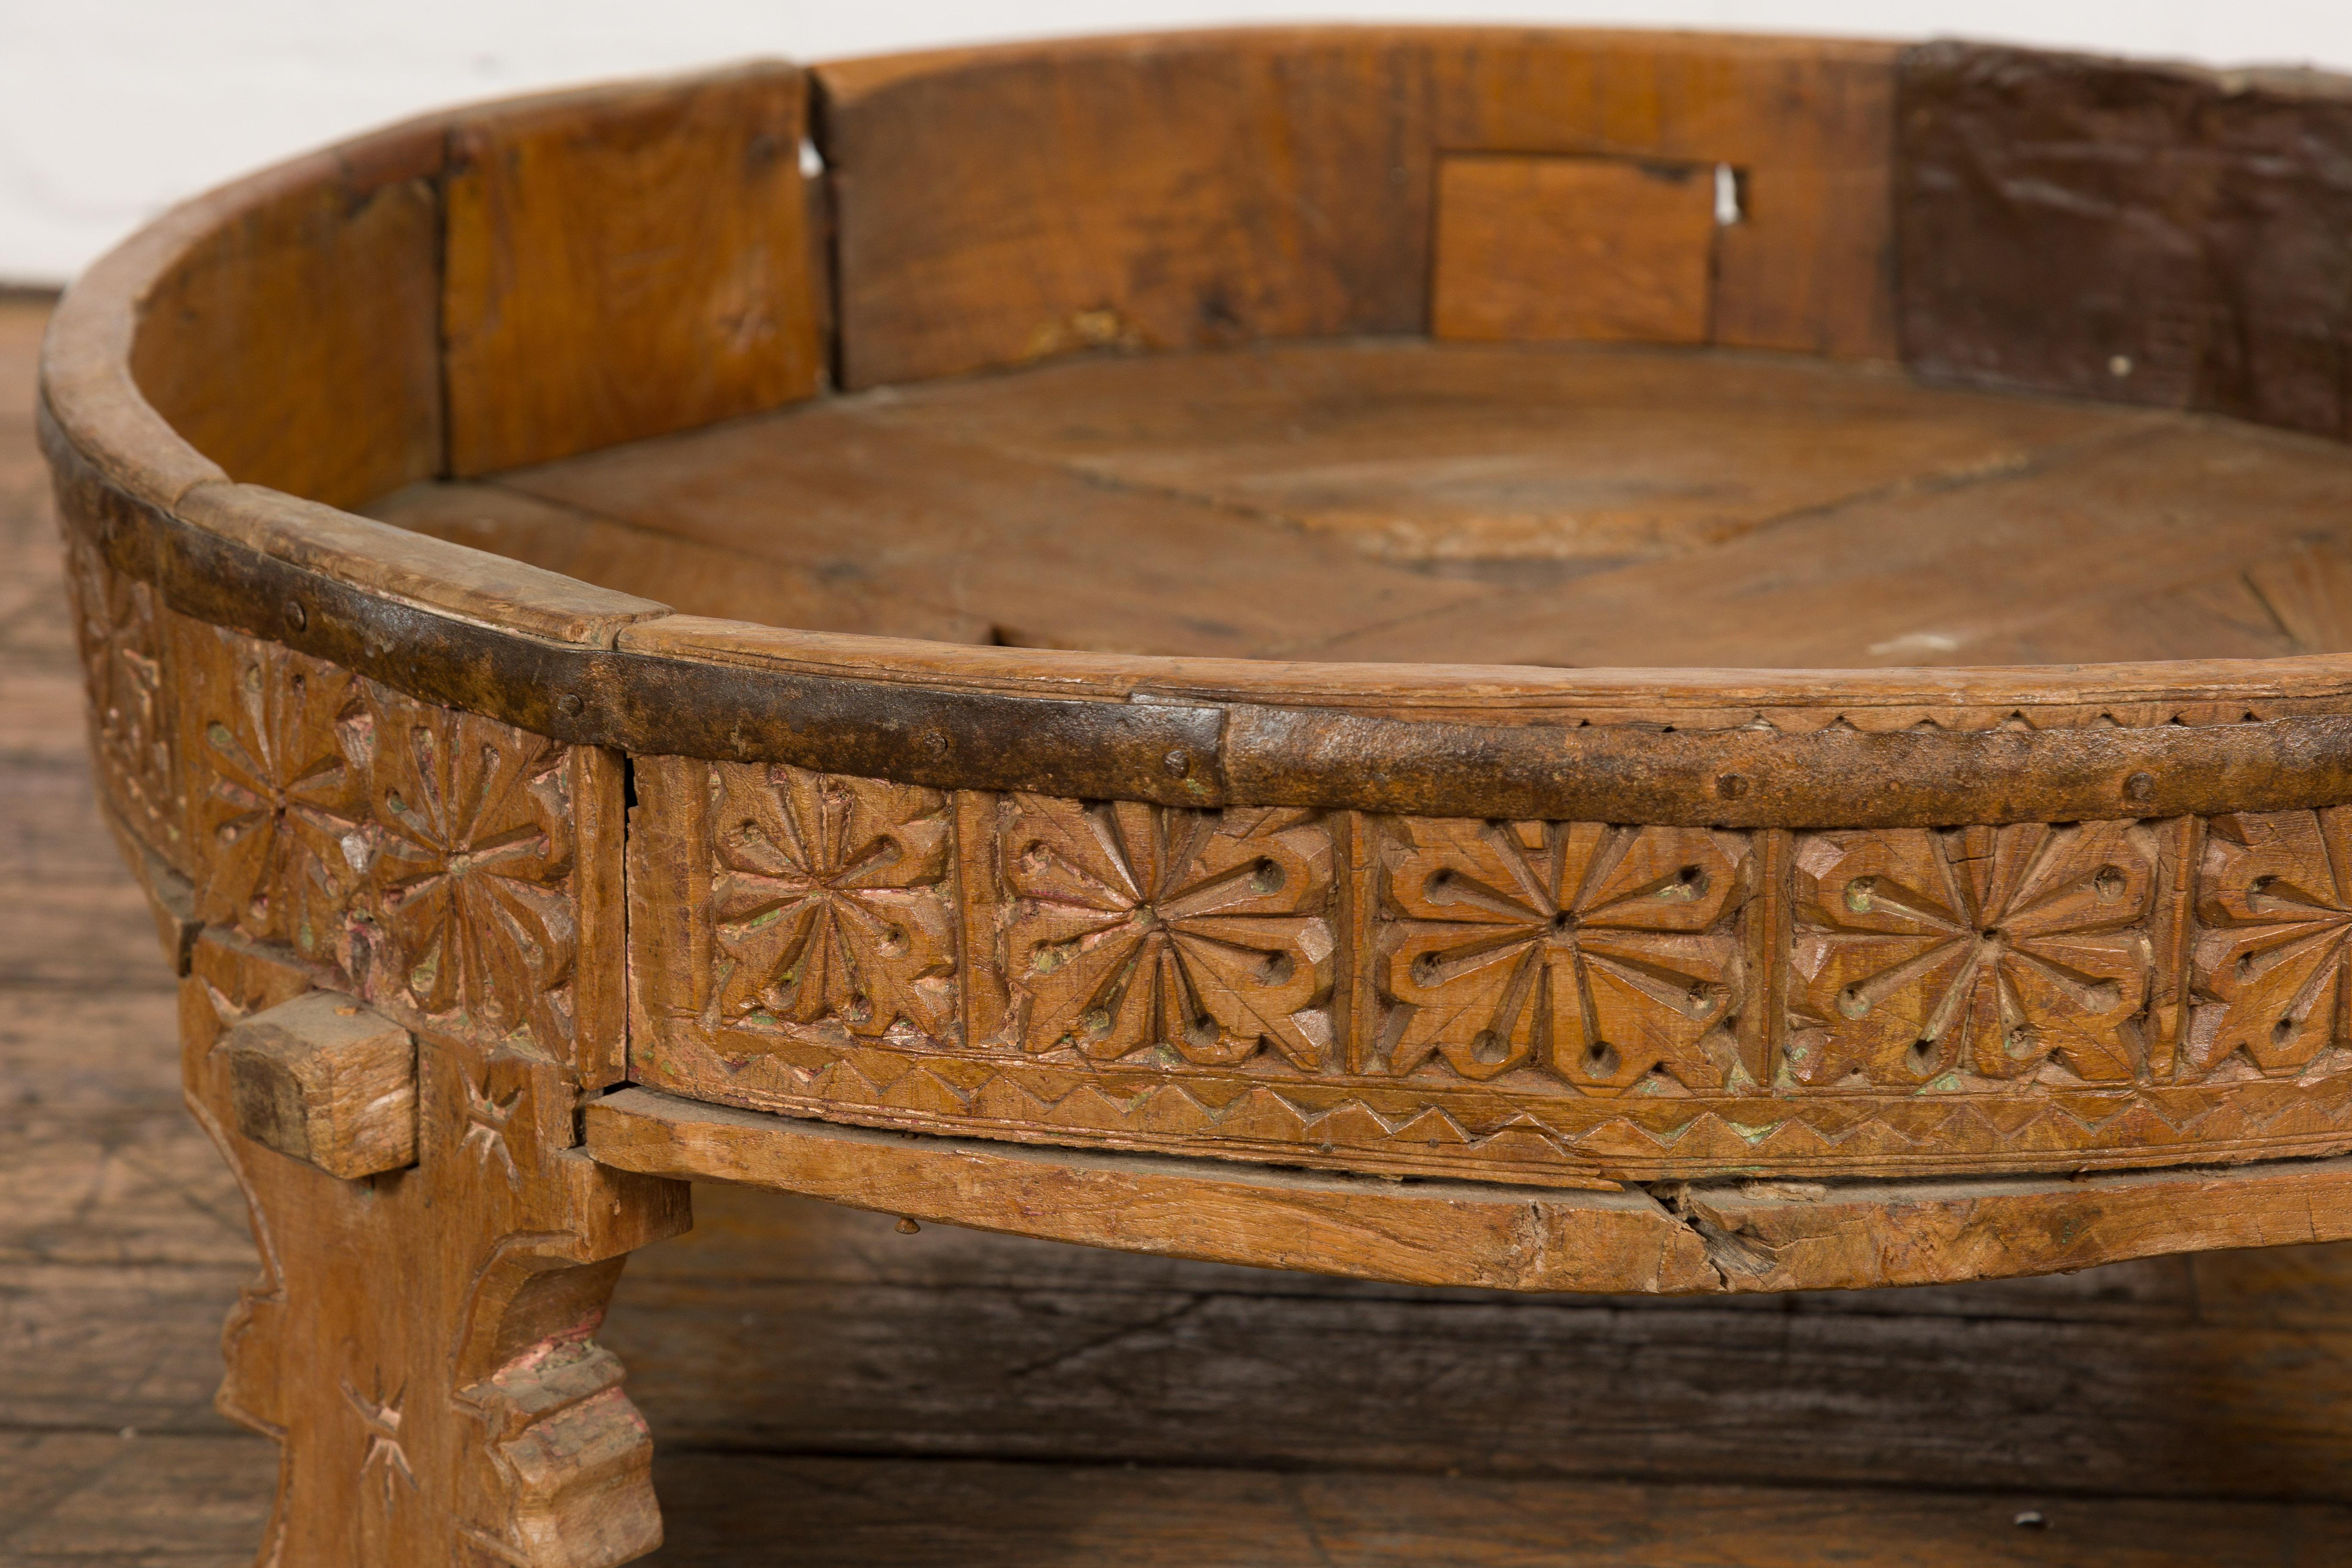 Indian Tribal 1920s Teak Chakki Grinding Table with Geometric Hand-Carved Motifs For Sale 1